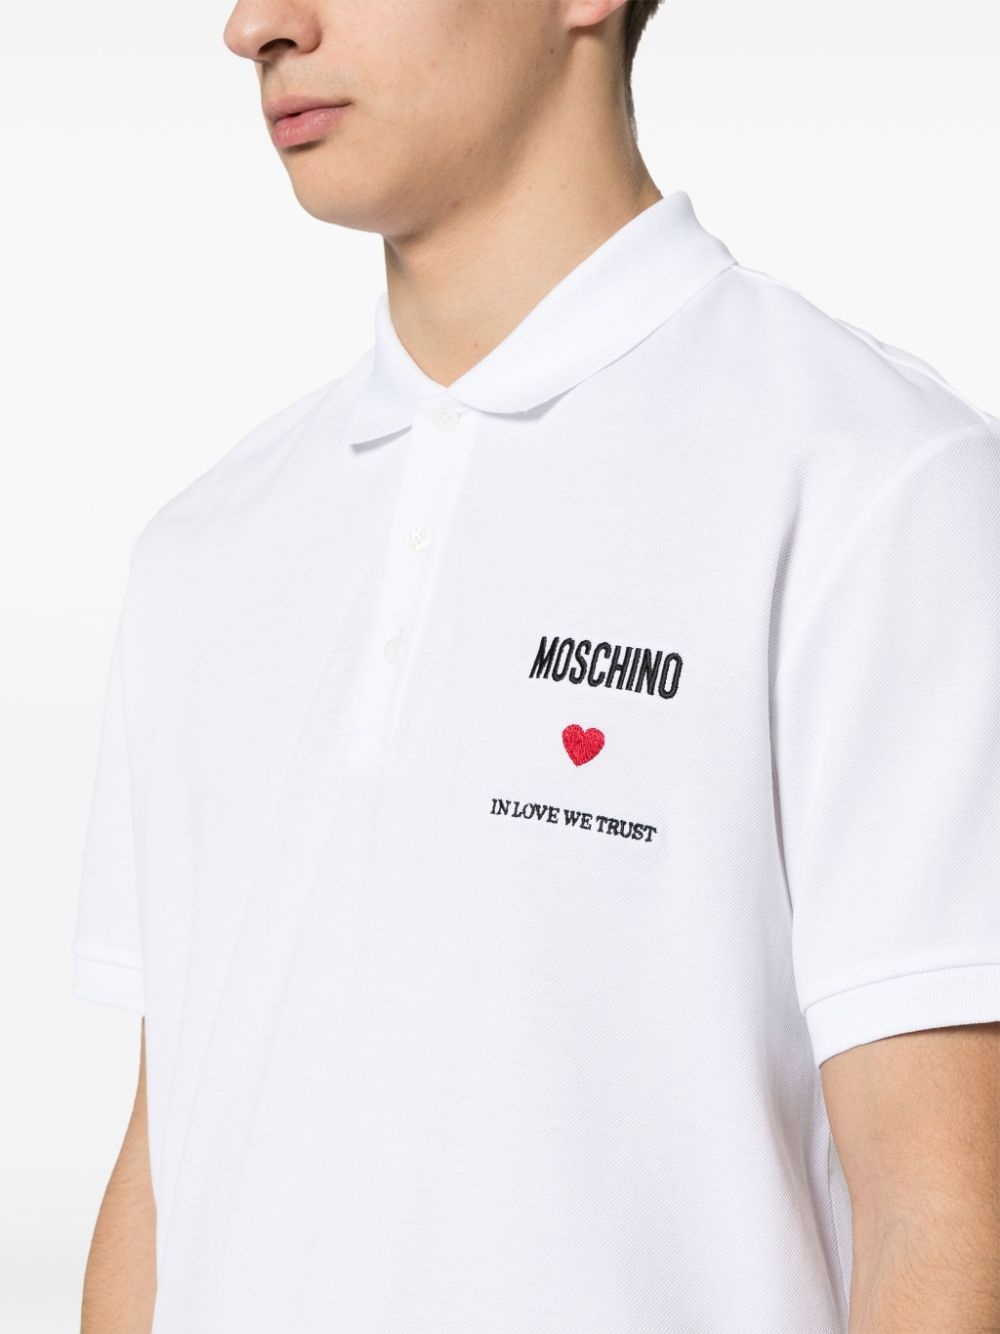 embroidered-quote polo shirt - 5